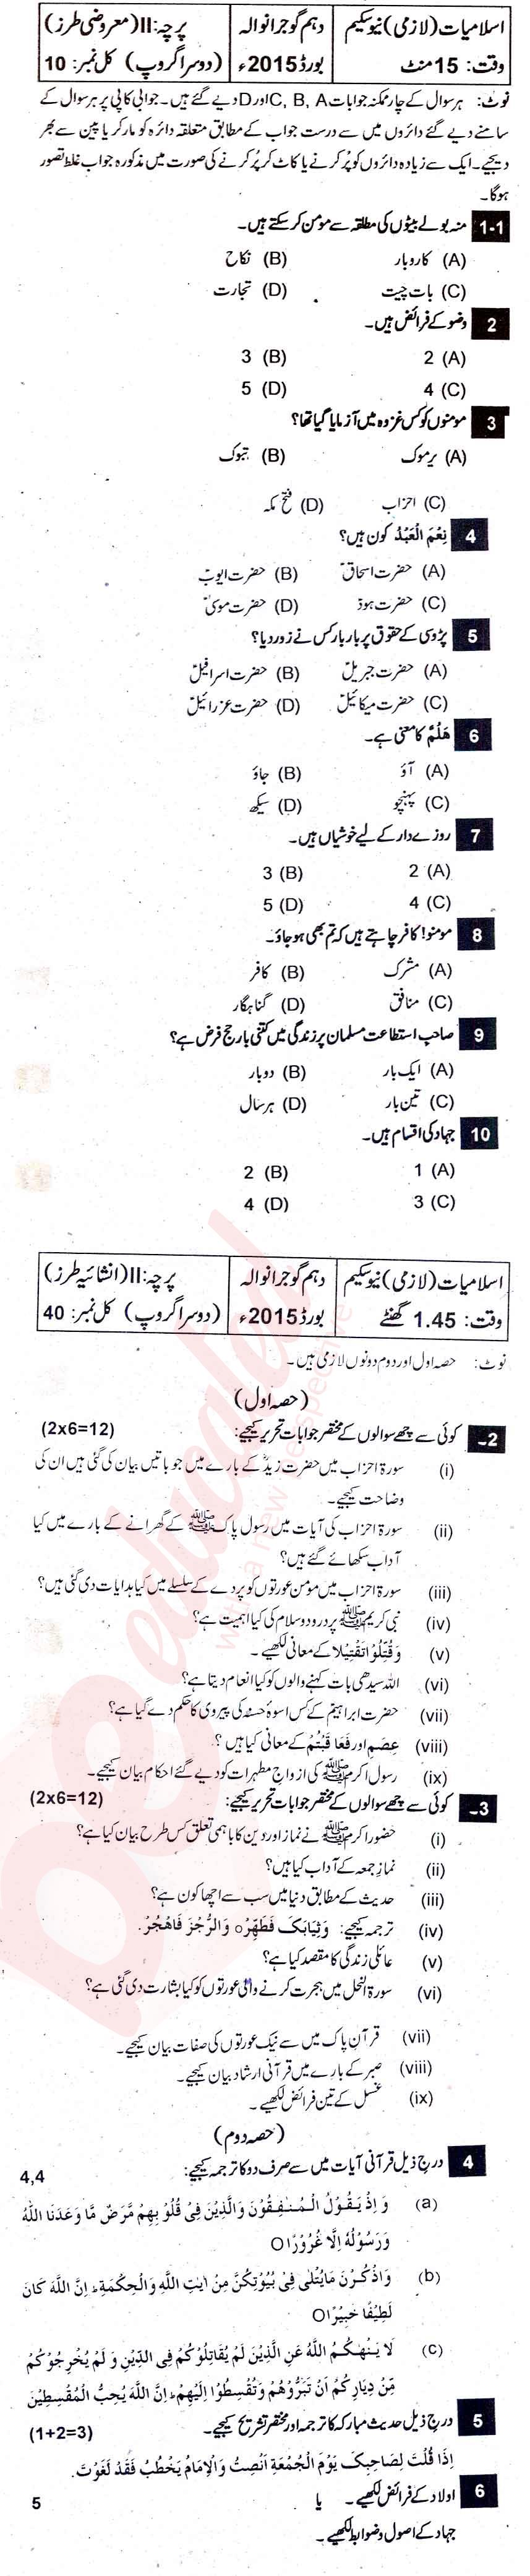 Islamiat (Compulsory) 10th class Past Paper Group 2 BISE Gujranwala 2015